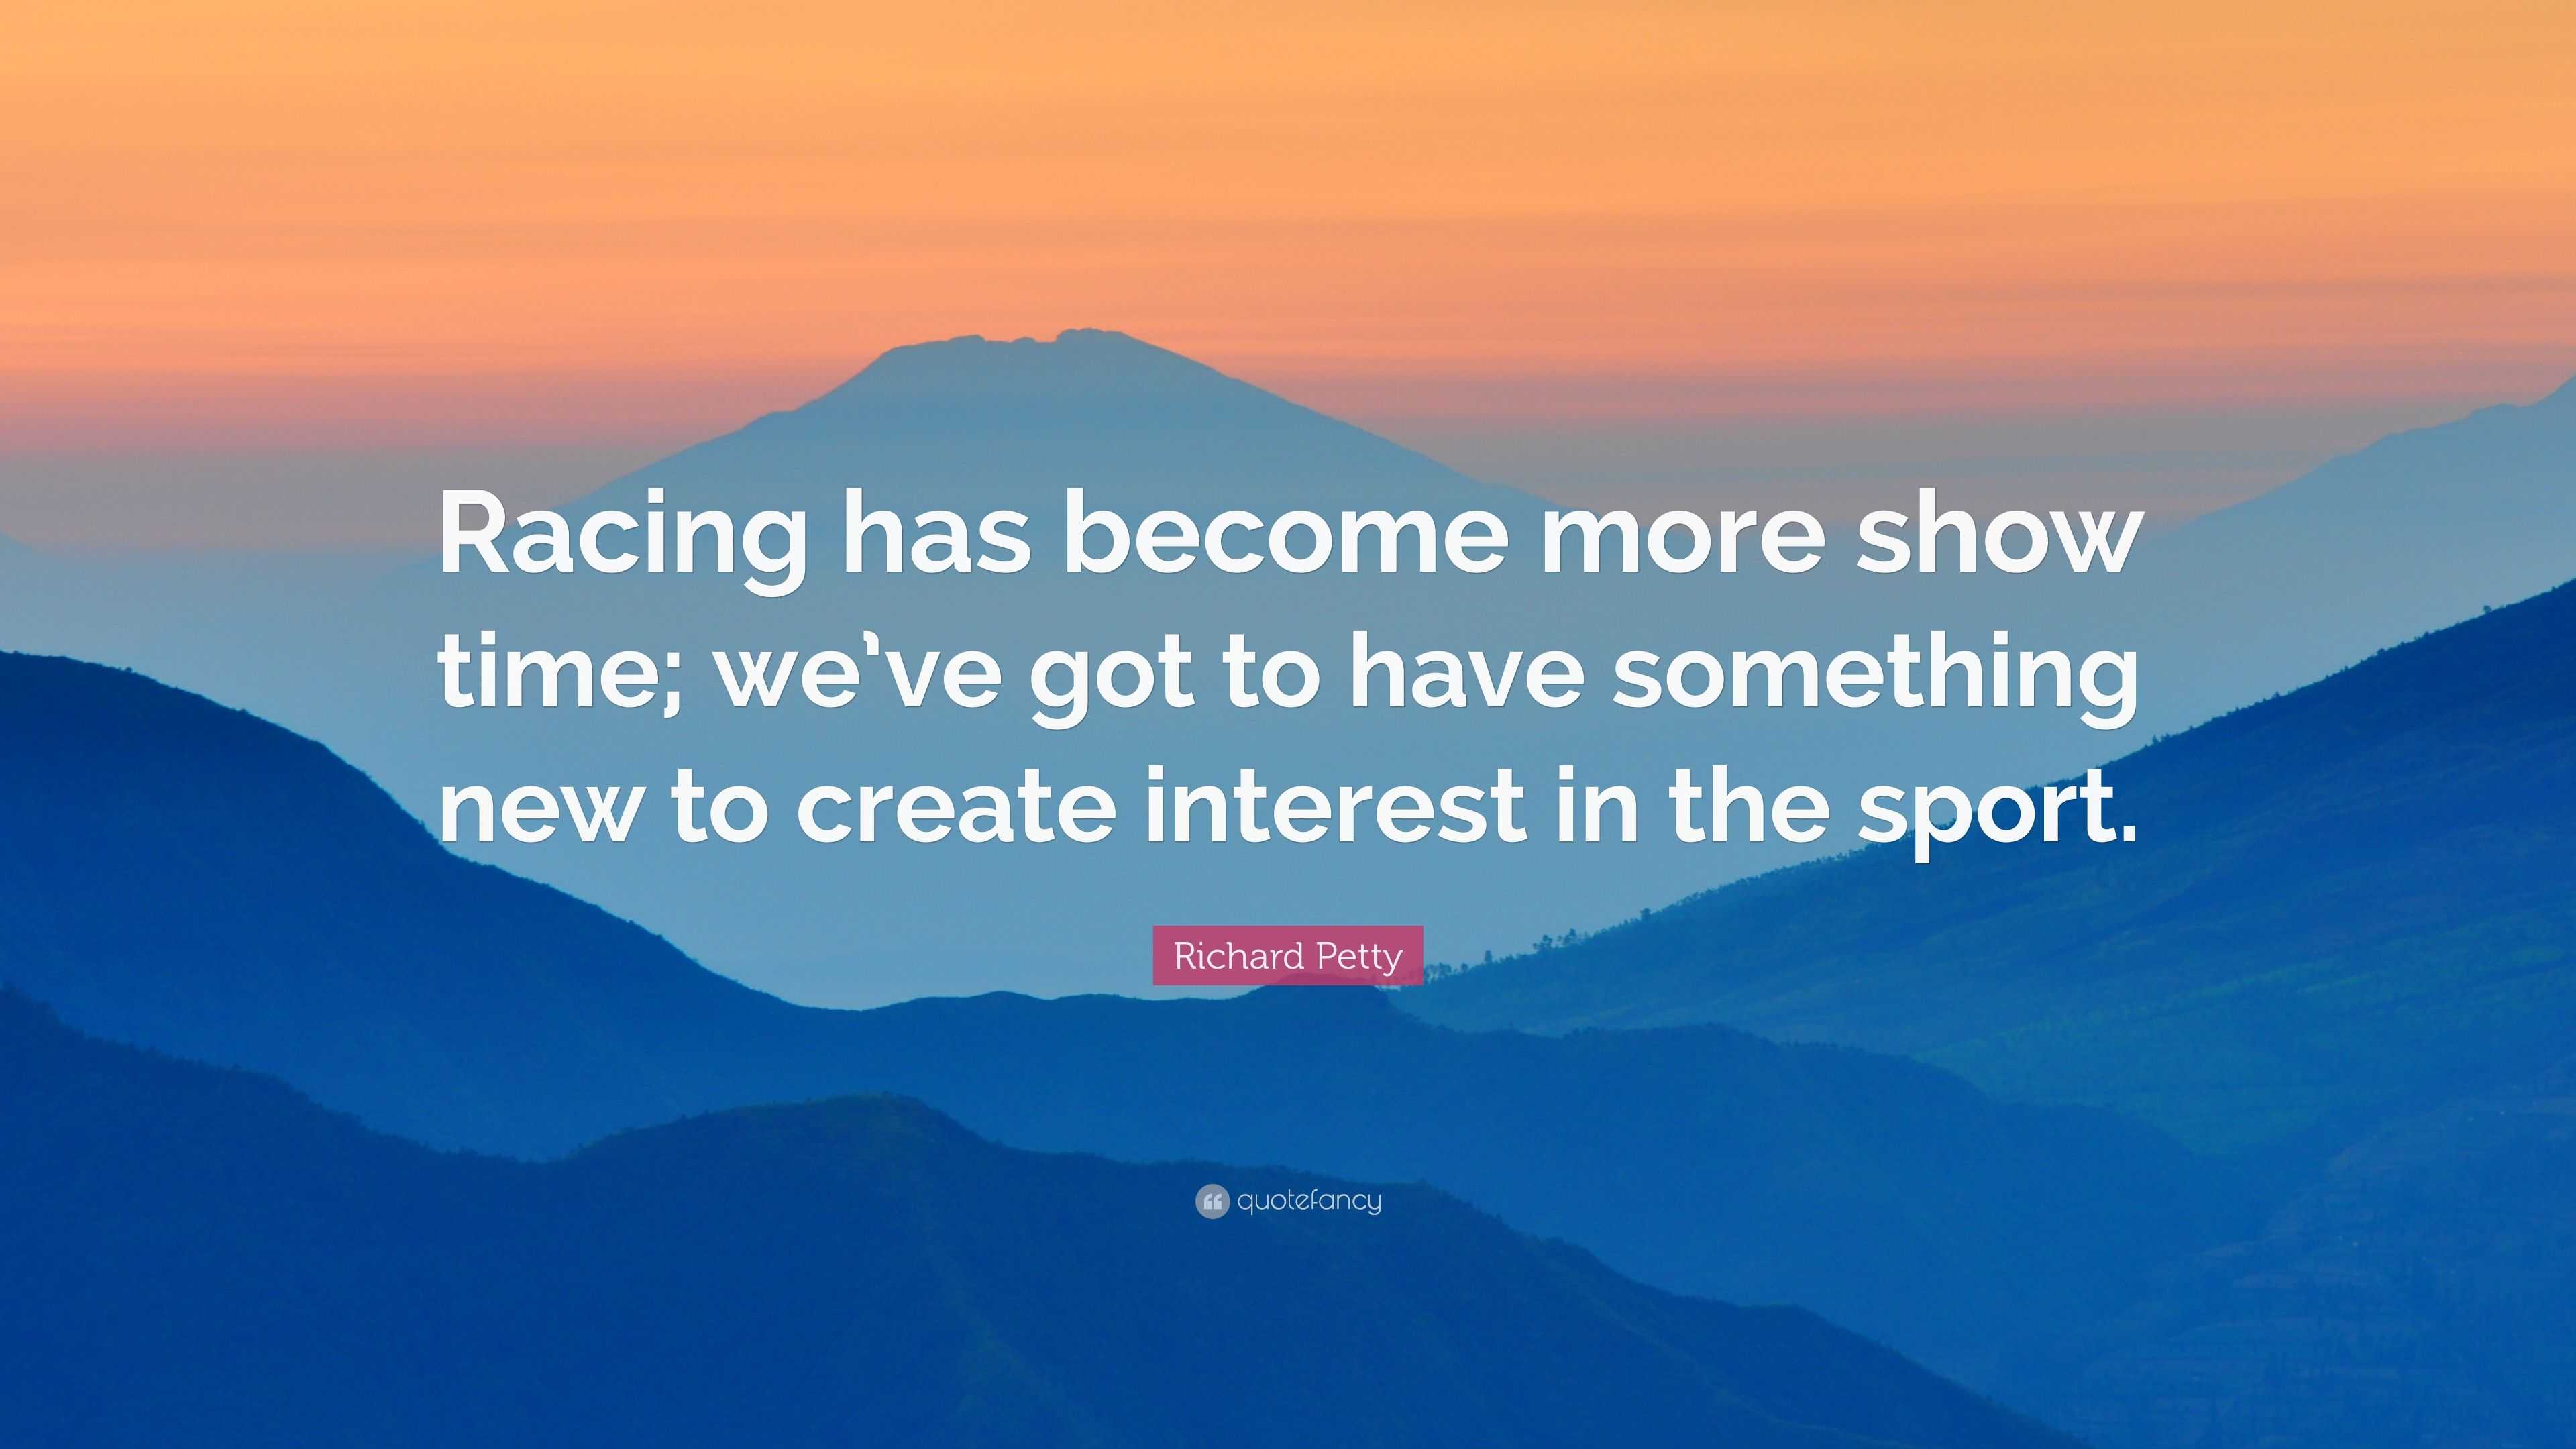 Richard Petty Quote: “Racing has become more show time; we’ve got to ...